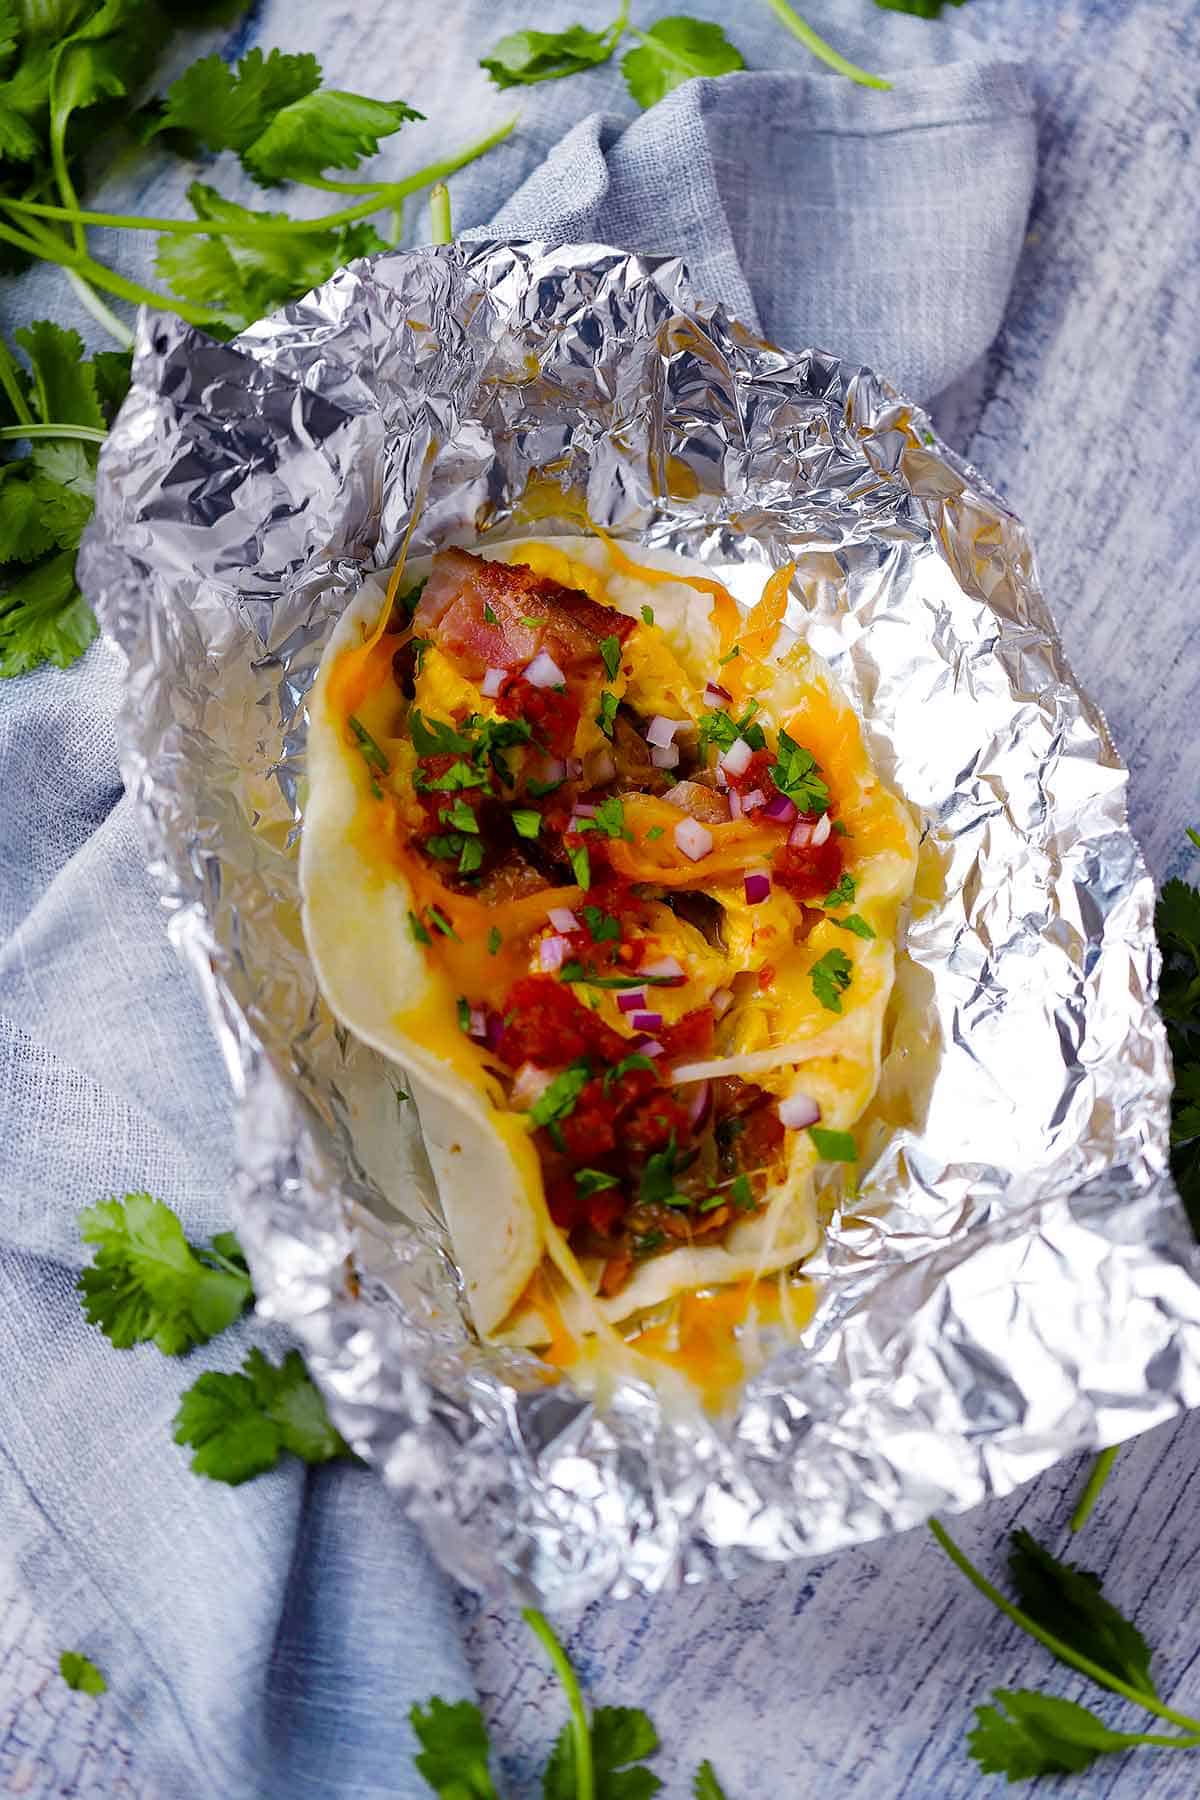 Breakfast taco with eggs, bacon, and cheese unwrapped from foil.